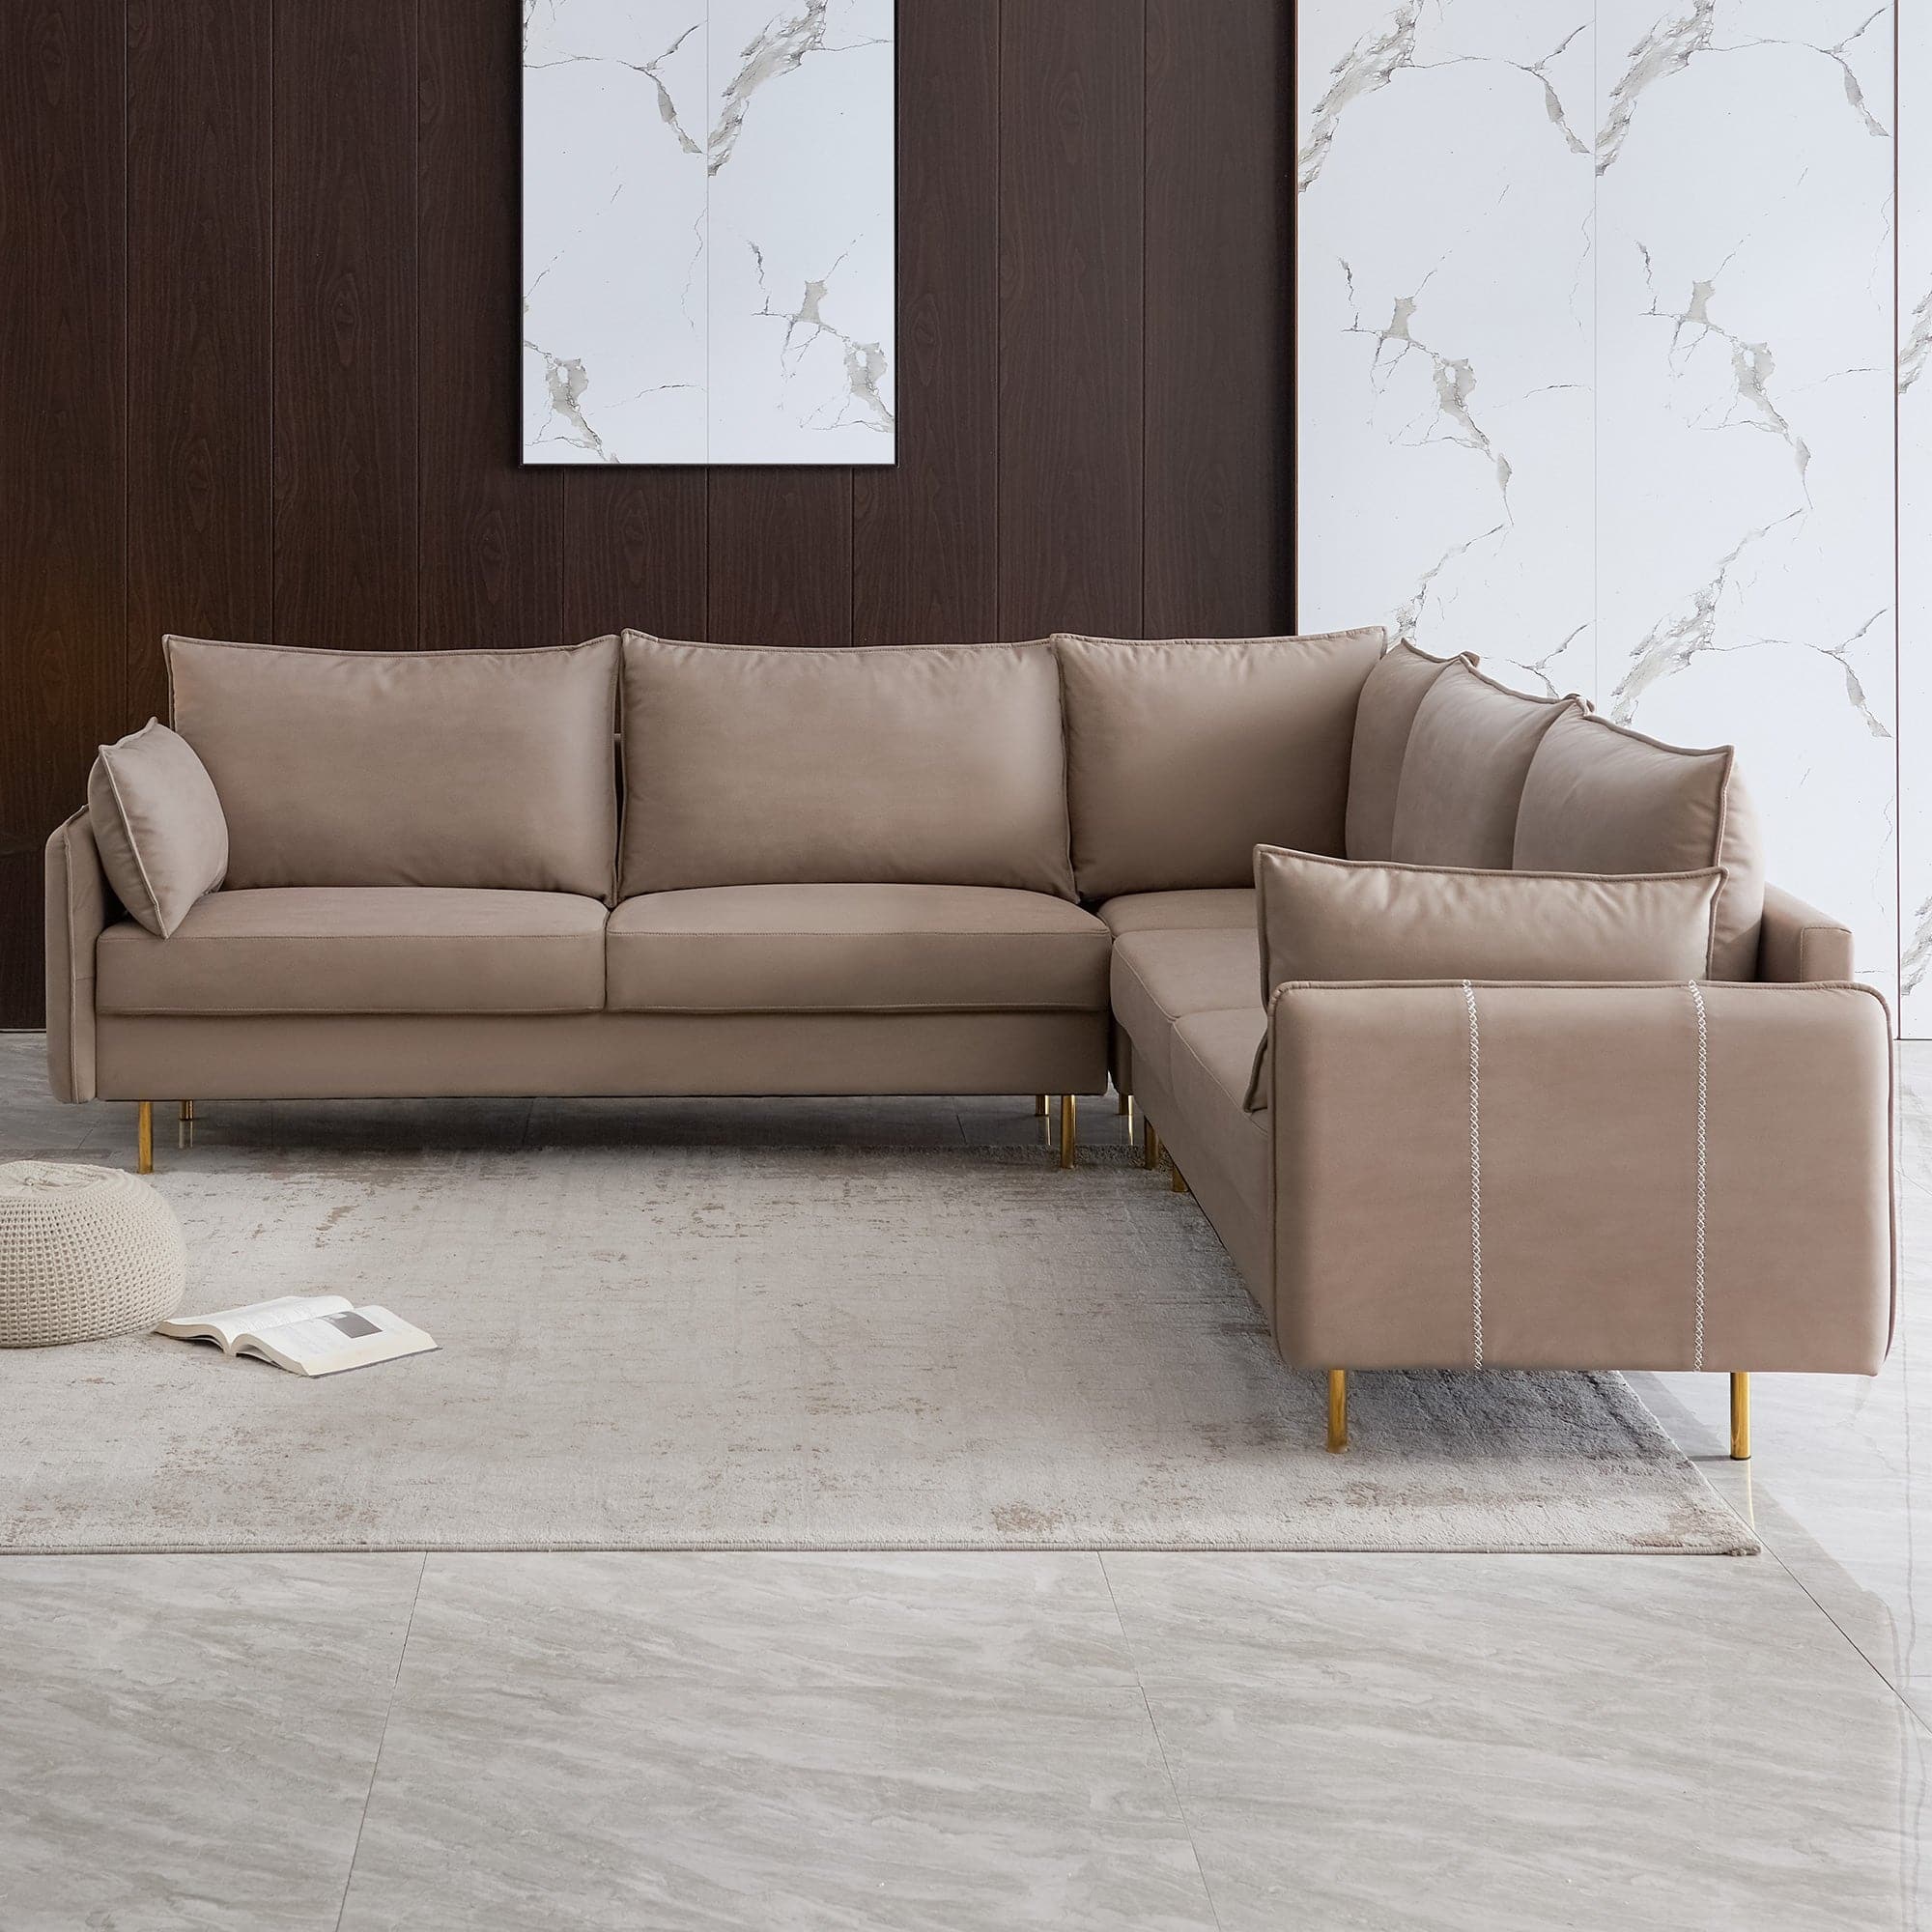 - TFC&H Co. L-Shaped Corner Sectional Technical Leather Sofa - Beige- Ships from The US - sectional at TFC&H Co.